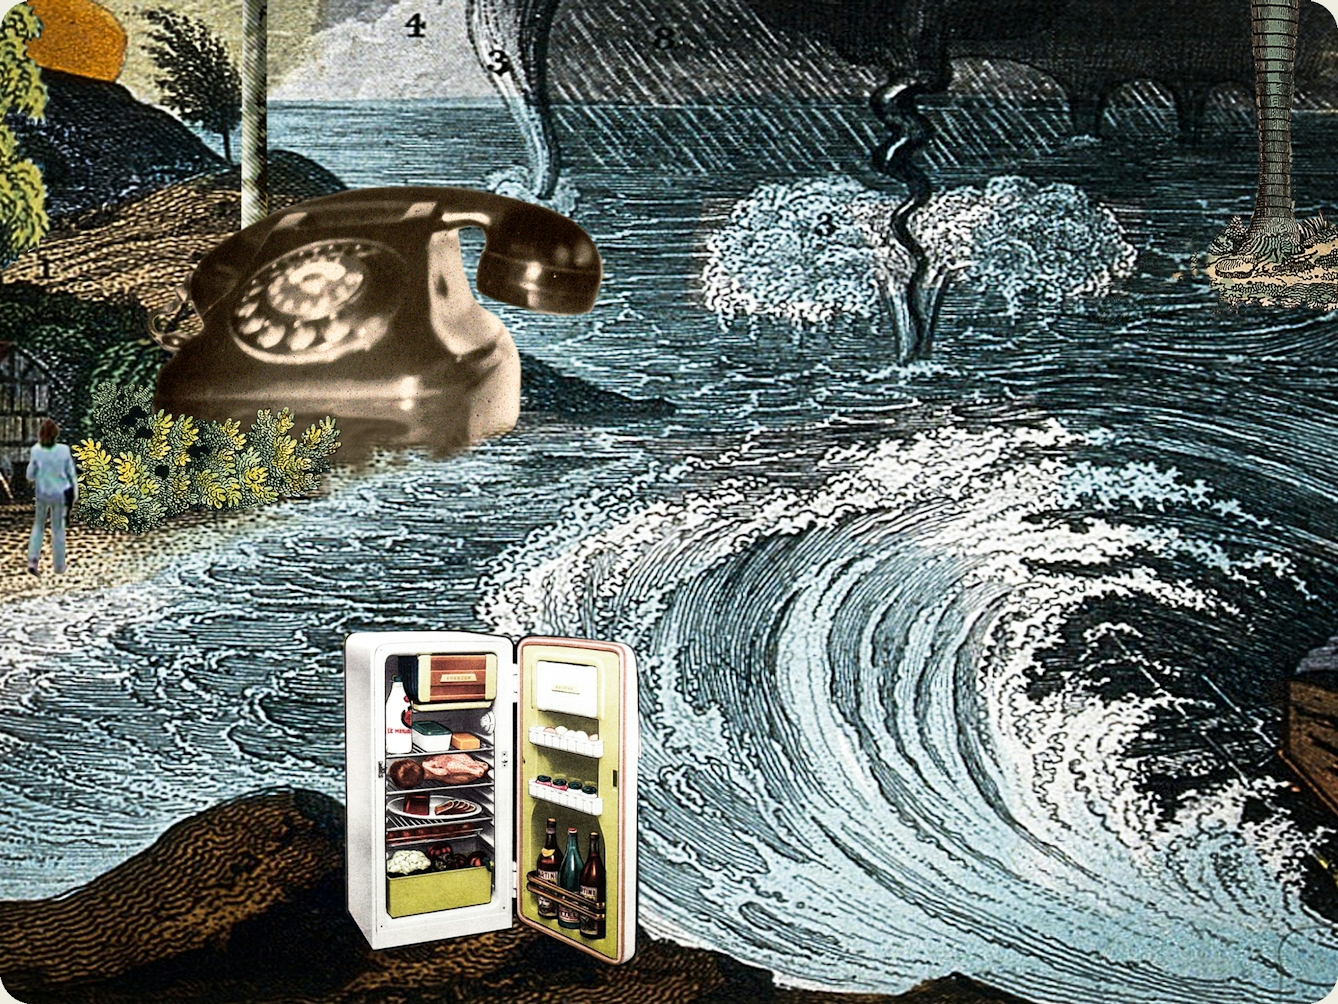 Artwork using collage. The collaged elements are made up of archive material which includes vintage and contemporary photographs, etchings, painted illustrations, lithographic prints and line drawings. This artwork depicts a scene from a costal landscape. The background is an expanse of ocean which meets a sandy shoreline. At sea can be seen stormy weather with tornadoes, and dark clouds. On the shoreline trees rise up. Peppering the shore are a rotary telephone, a telegraph pole and a small wooden house. Along the foreground is an open refrigerator containing food.